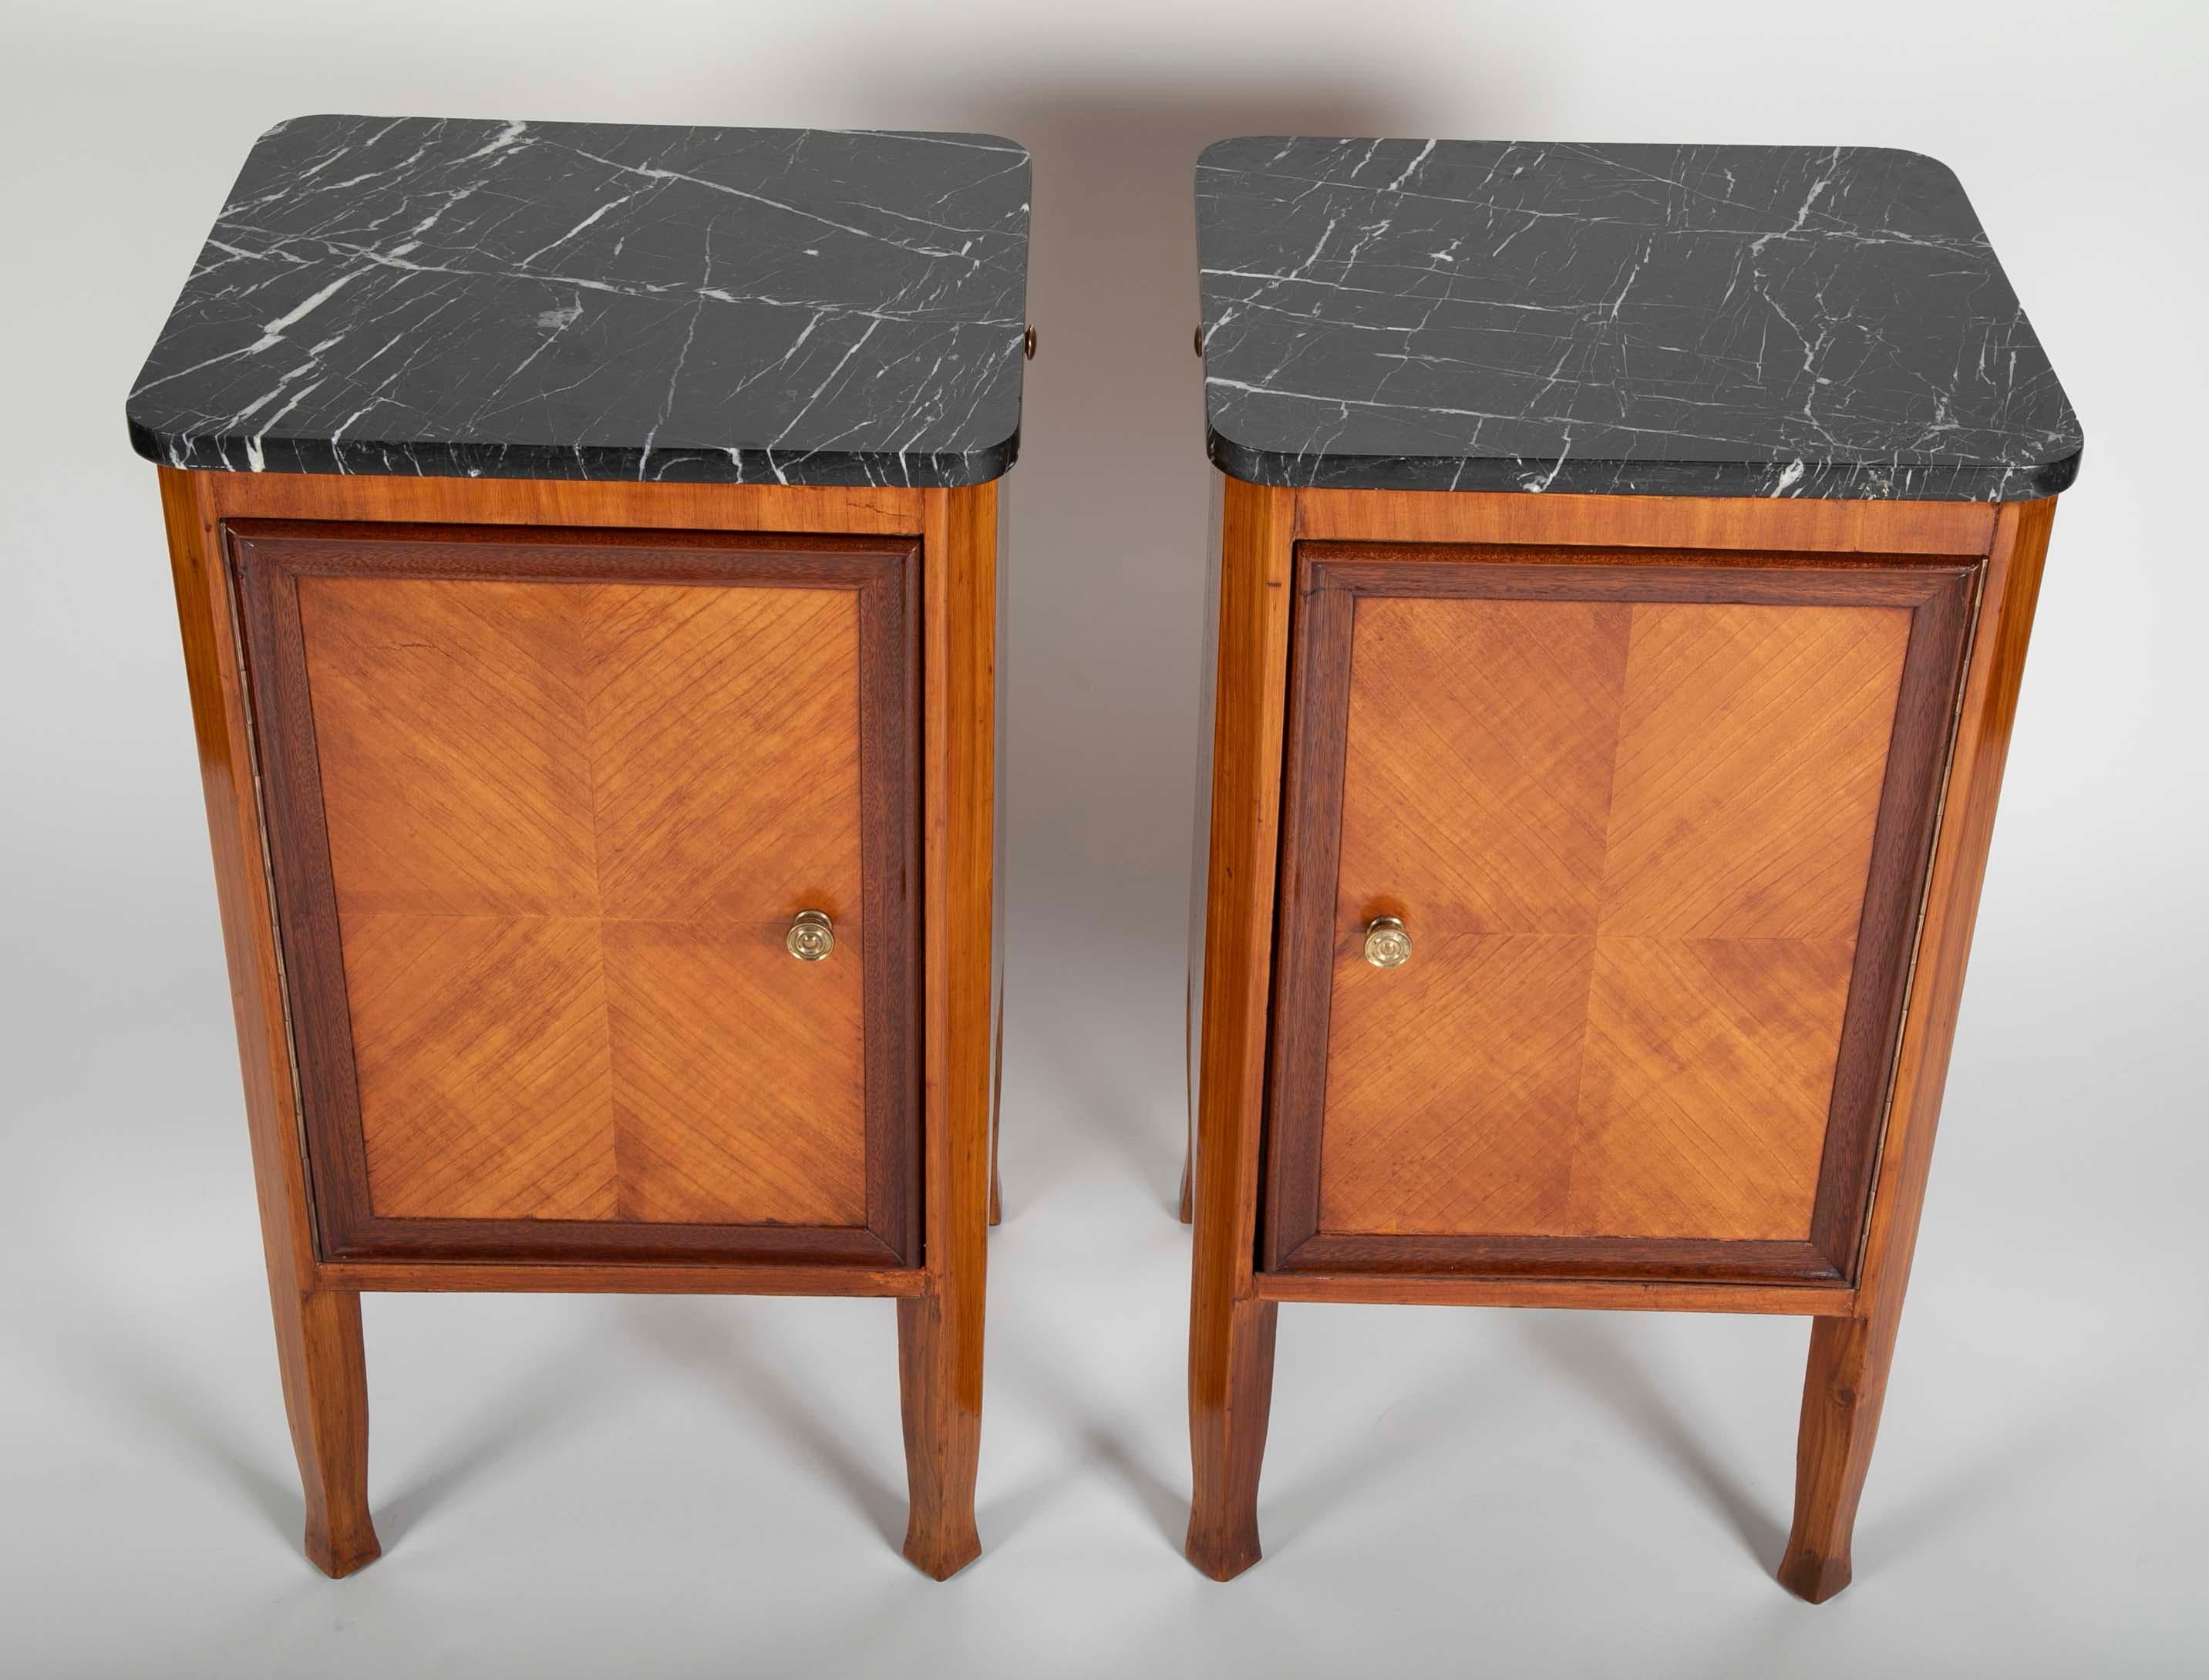 Fruitwood Pair of Italian Fruit Wood Bedside Cabinets